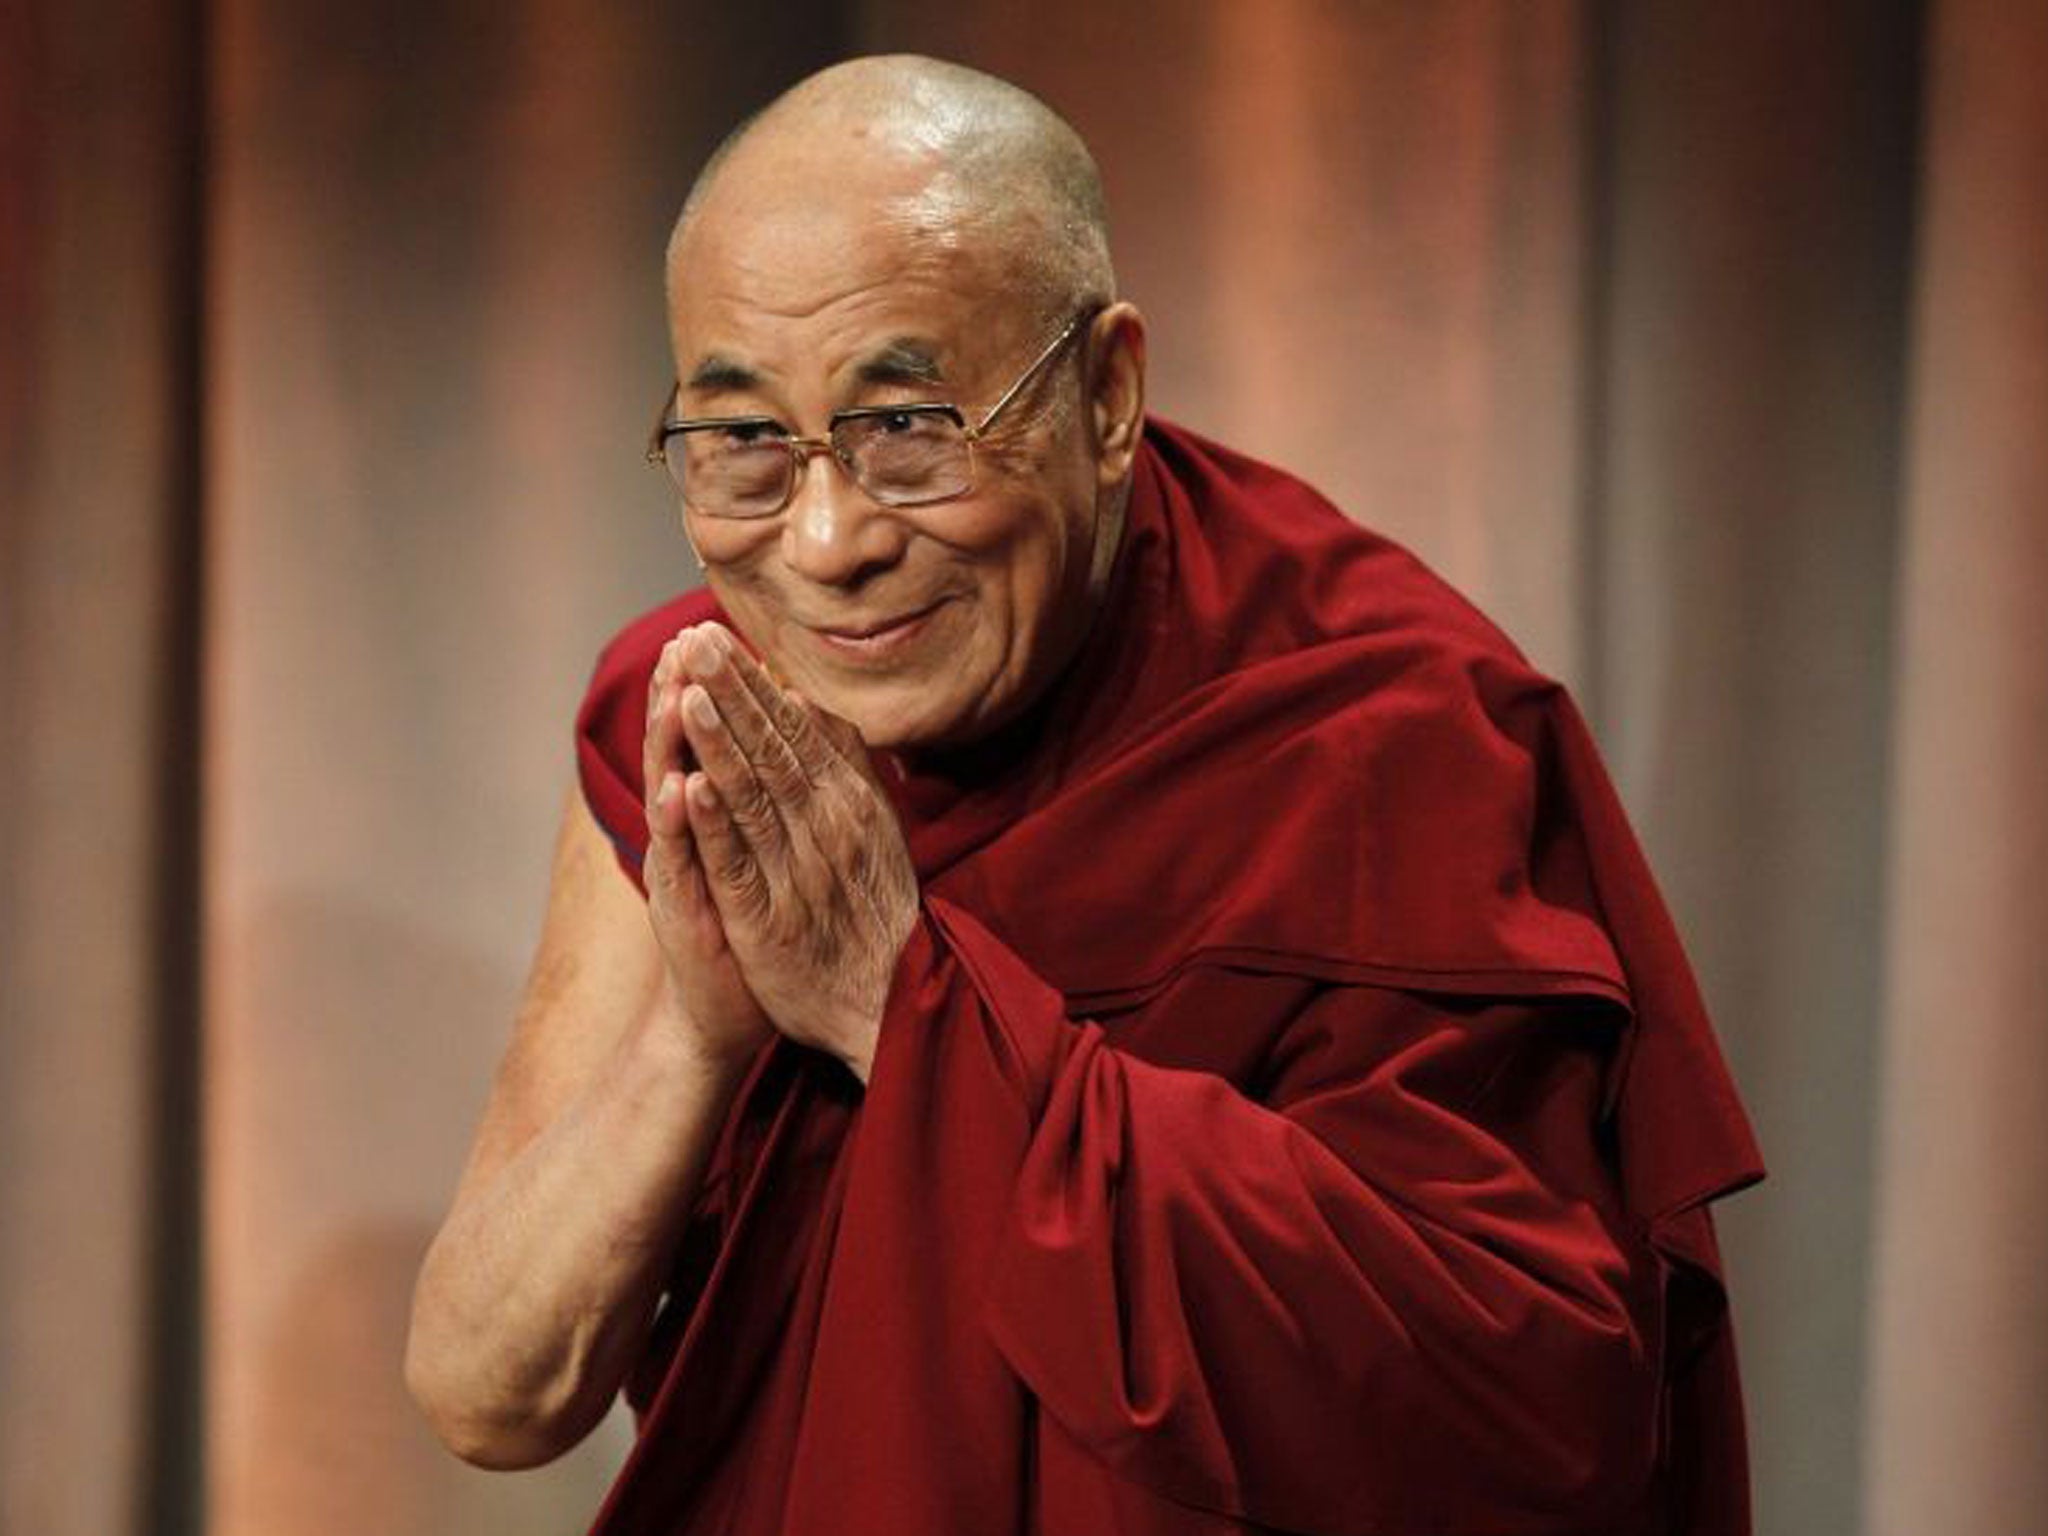 China aims to stamp out the voice of exiled Tibetan spiritual leader the Dalai Lama in his restive and remote homeland by ensuring that his "propaganda" is not received by anyone on the internet, television or other means, a top official said.